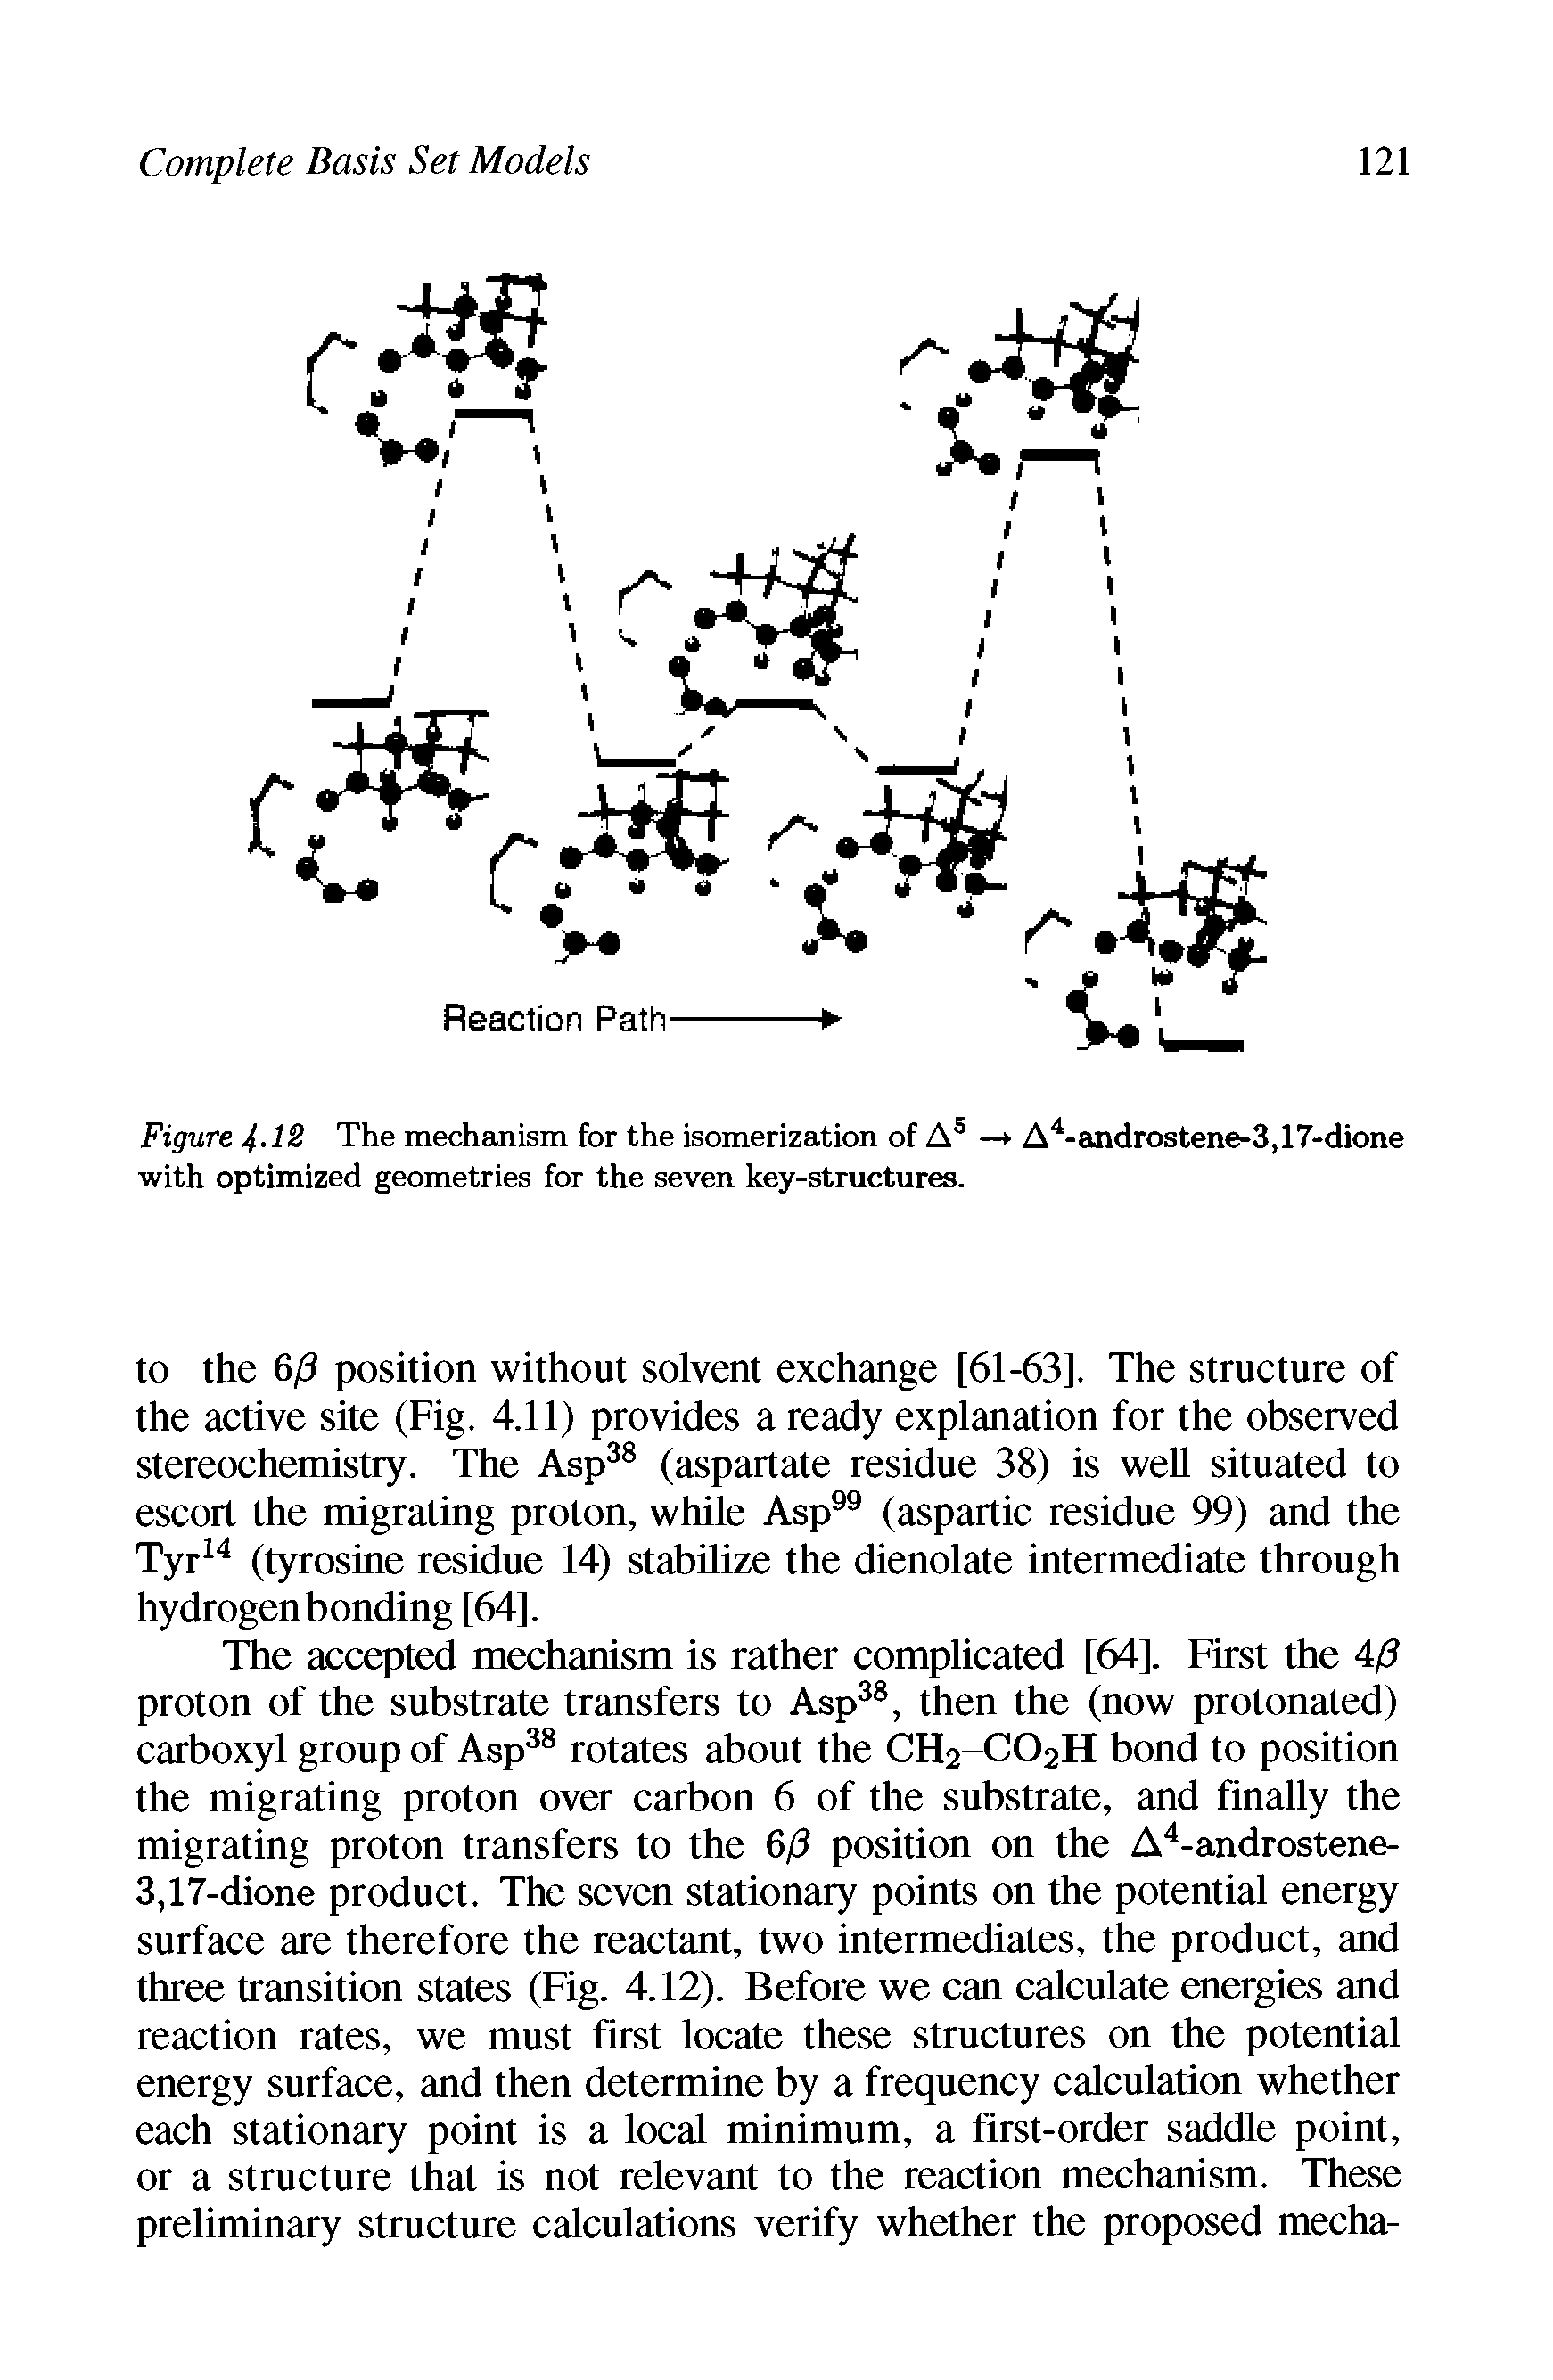 Figure 4-12 The mechanism for the isomerization of A5 — A4-androstene-3,17-dione with optimized geometries for the seven key-structures.